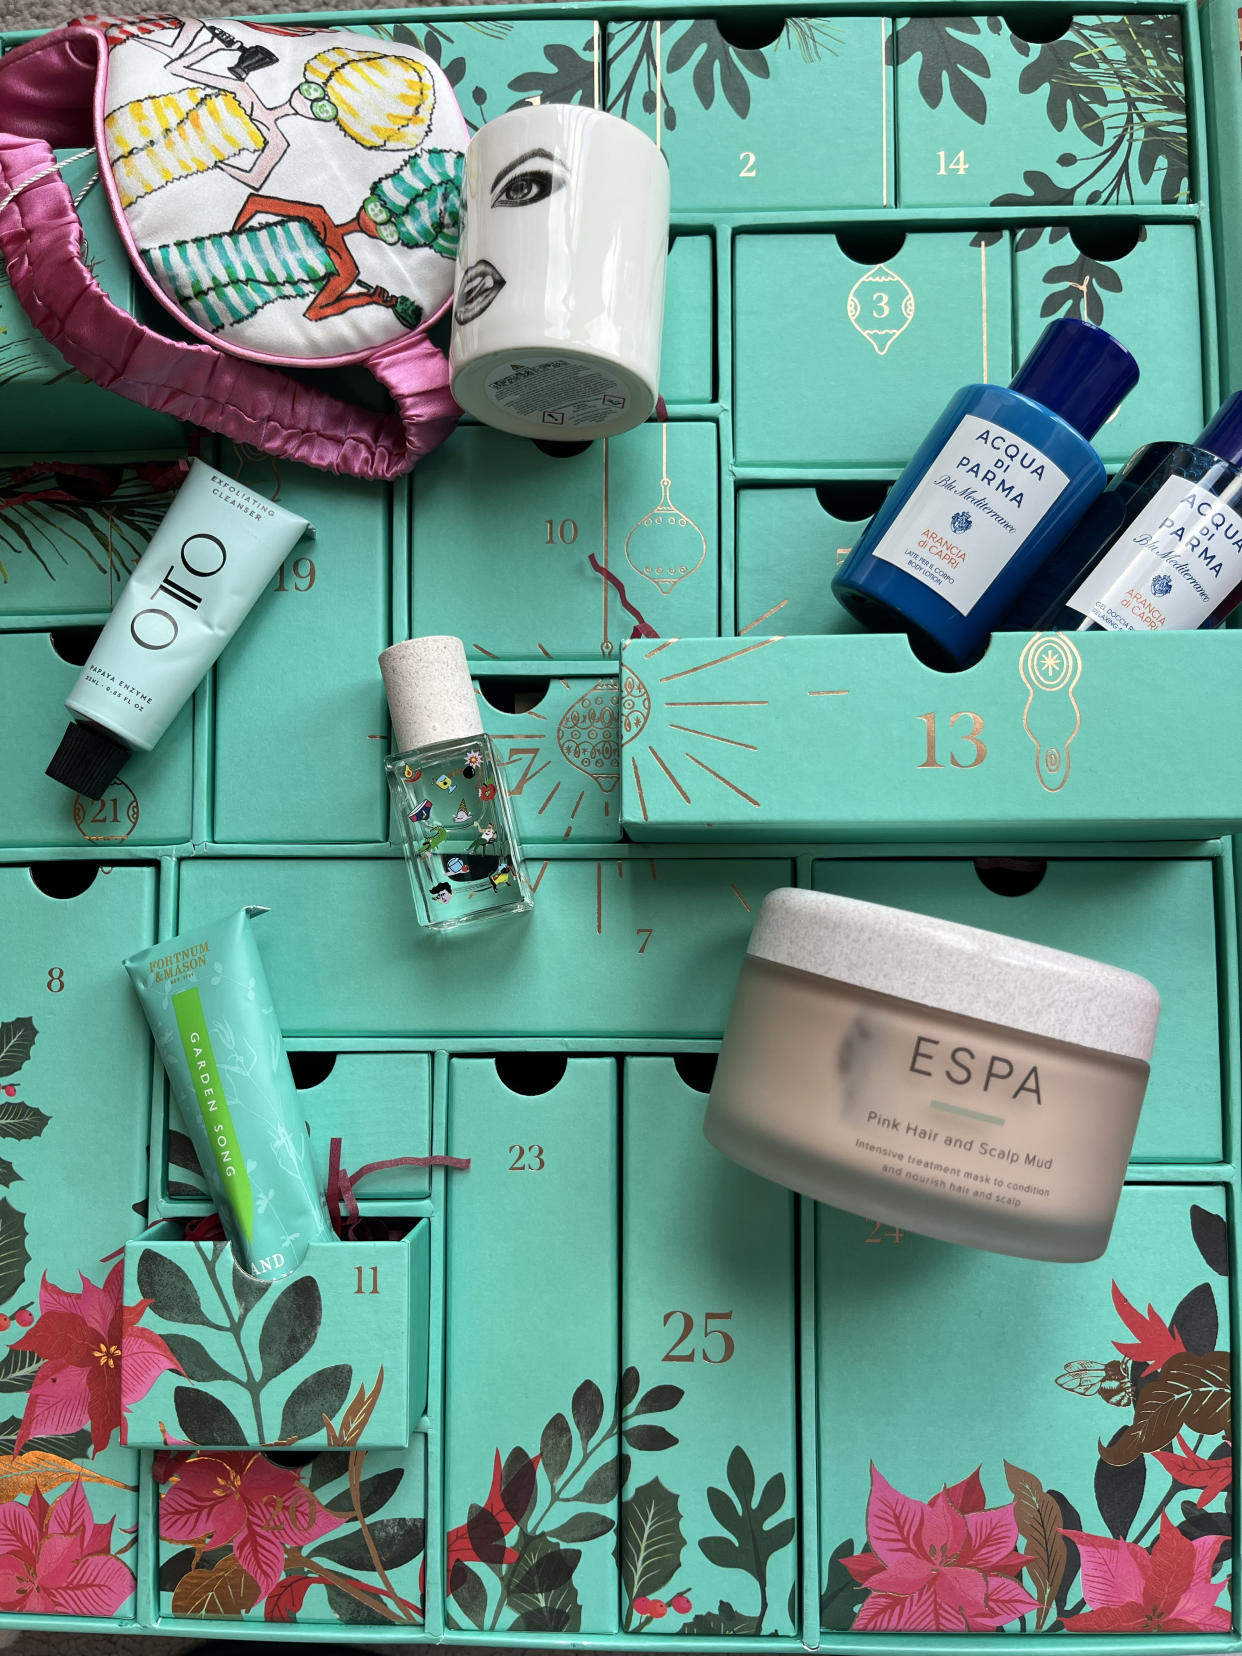 The calendar has a great range of products that are the ultimate self-care treat. (Yahoo Life UK)